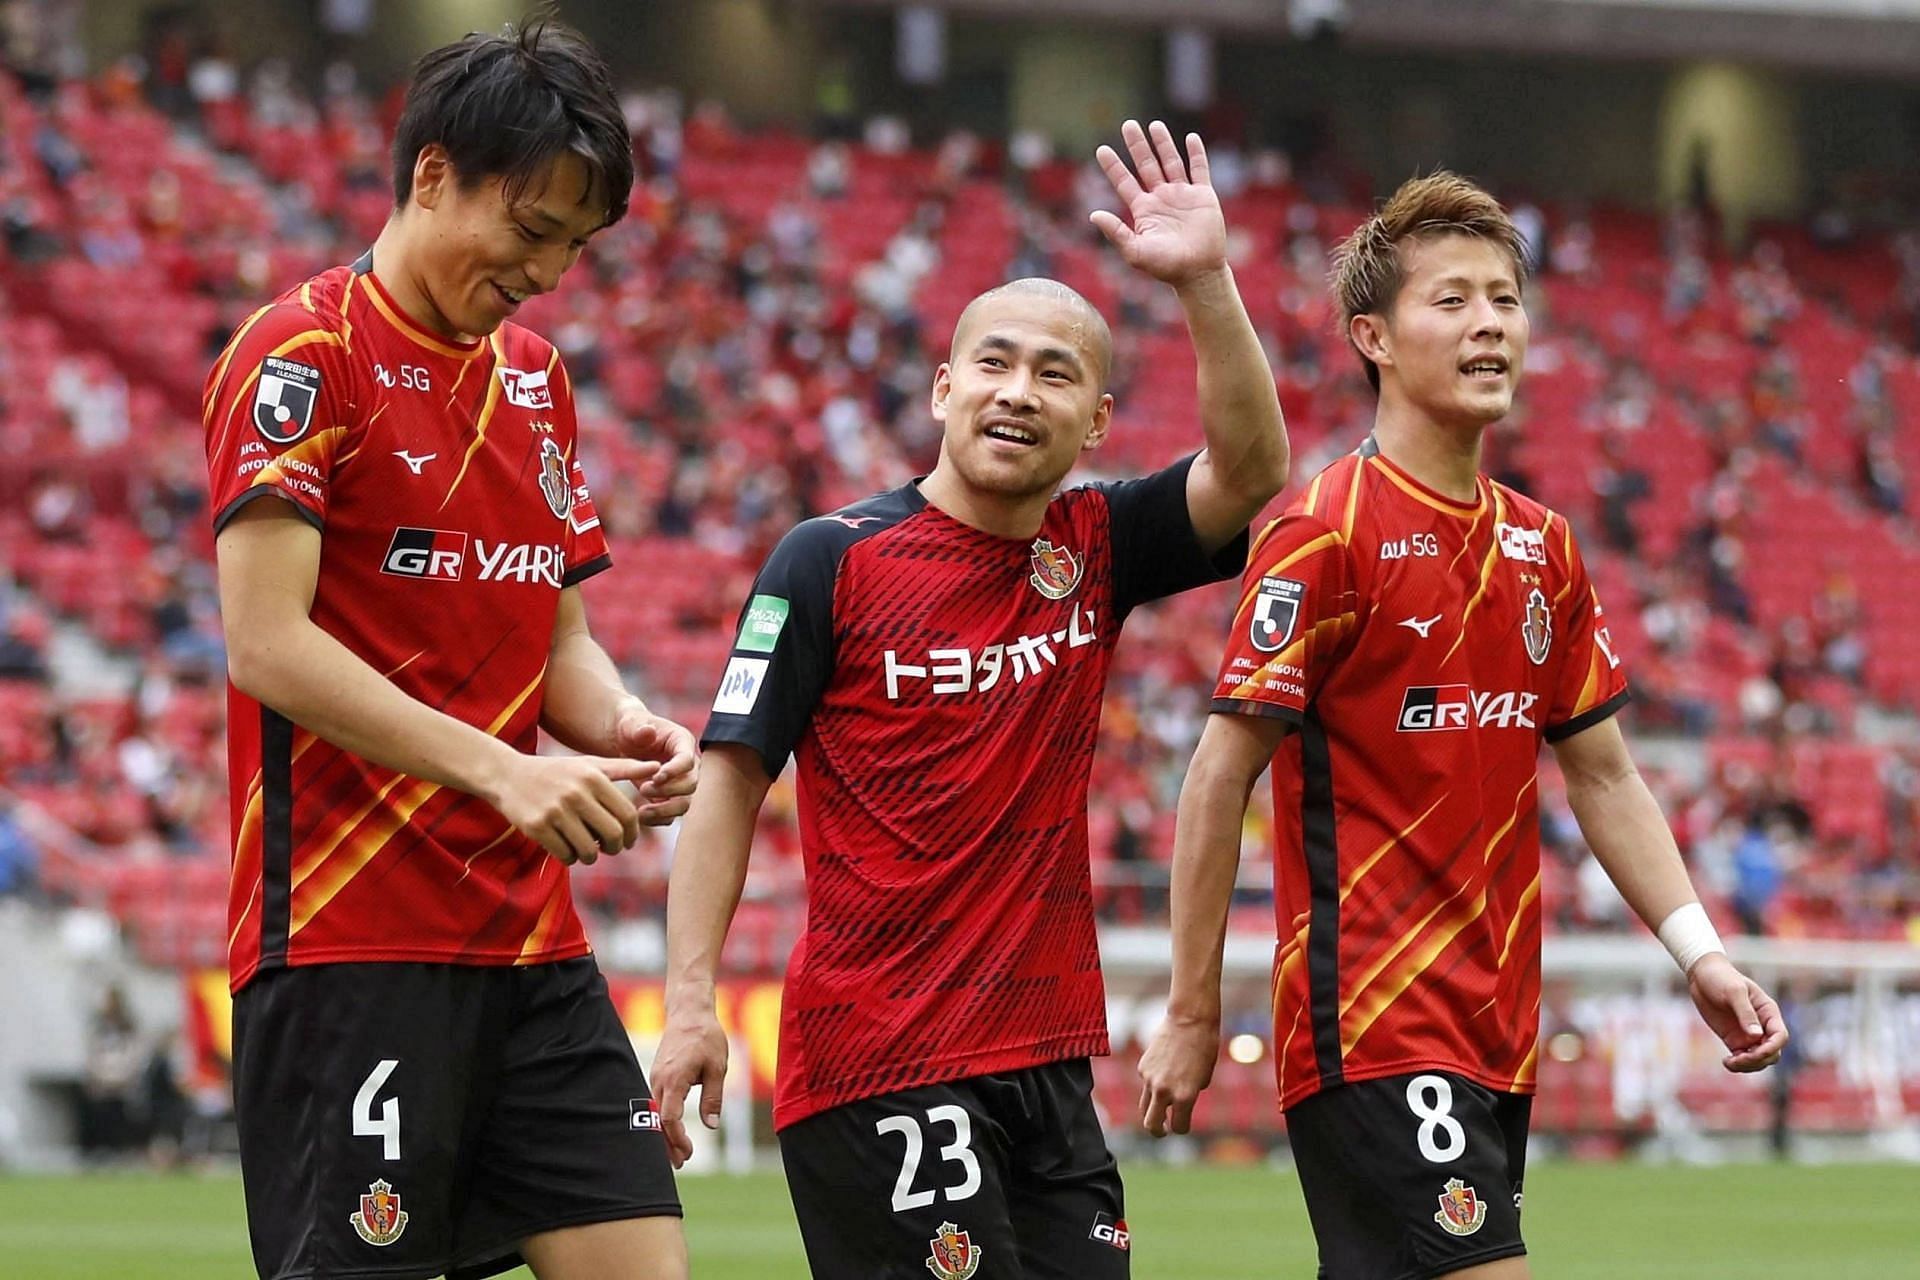 Nagoya Grampus and Shimizu S-Pulse go head-to-head in their J League Cup fixture on Saturday